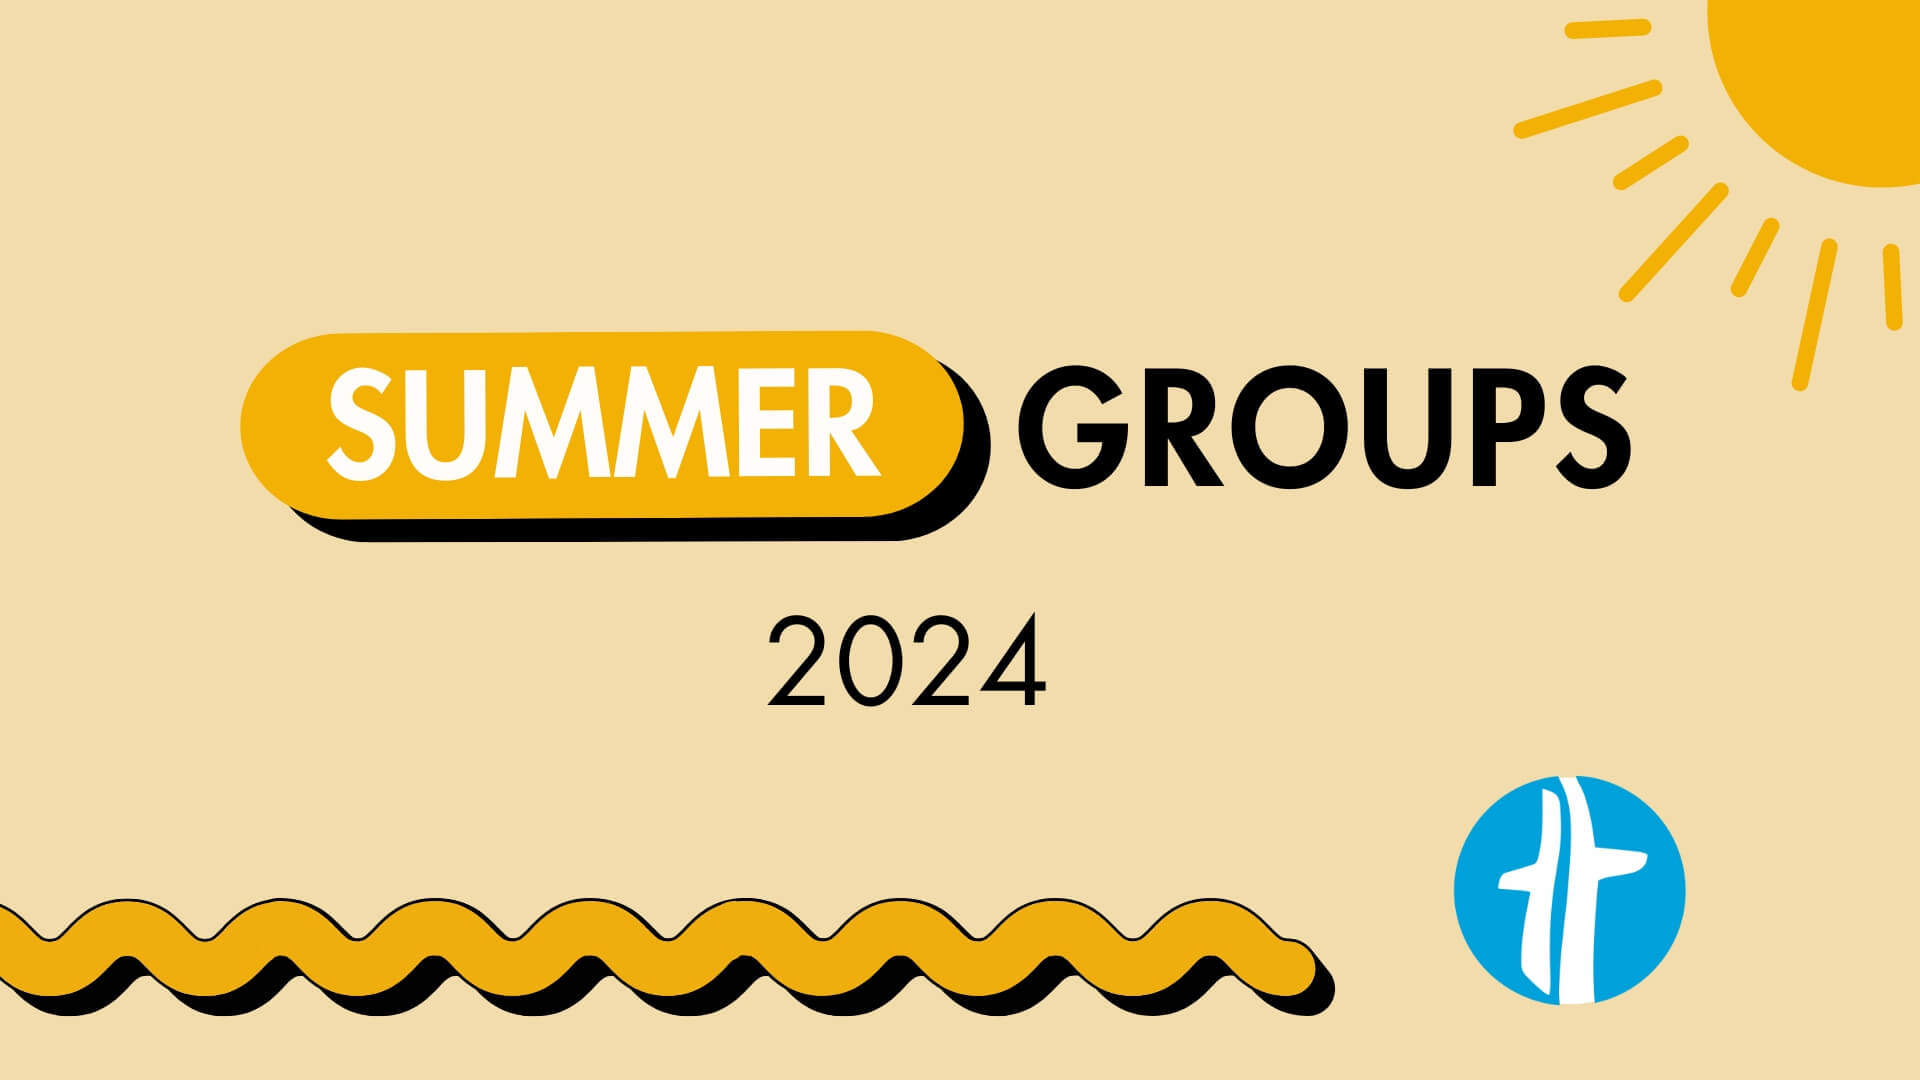 summer groups 2024 with background beach motif